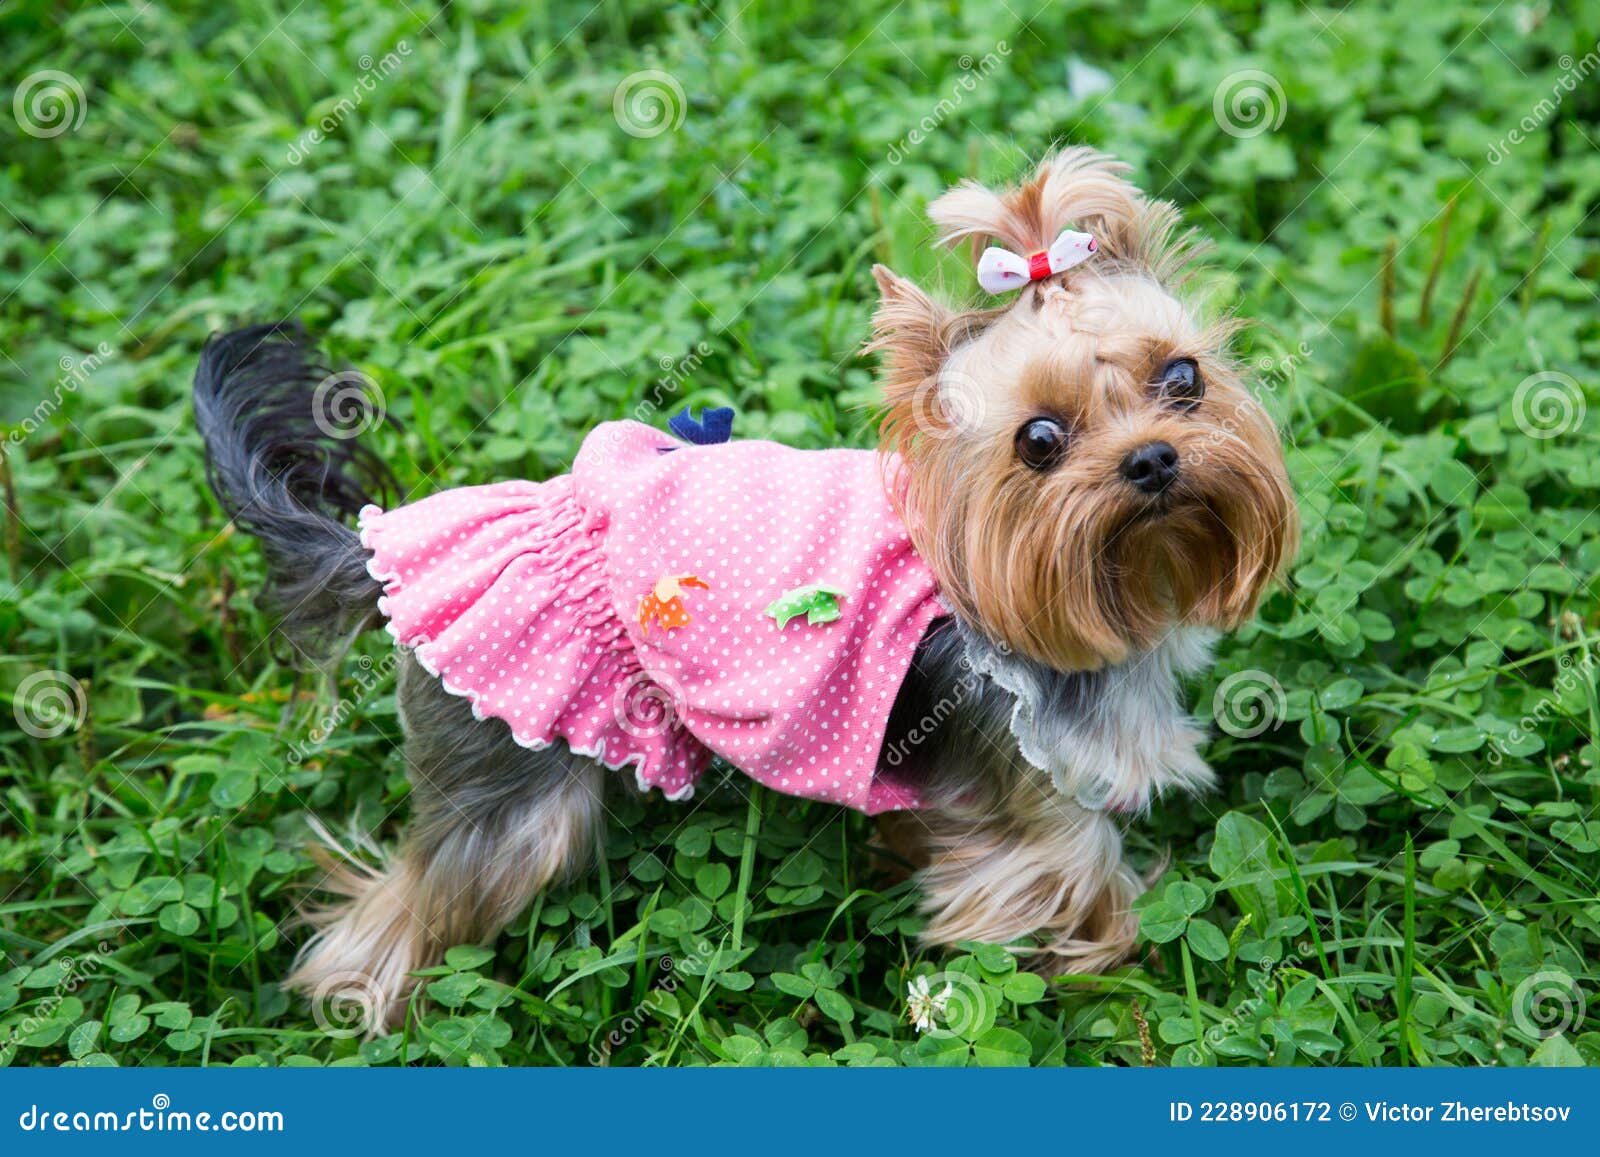 A Miniature Dog of the Breed Yorkshire Terrier Mini English Yorkshire  Terrier in a Pink Shirt Looking at the Camera Stock Photo - Image of cute,  miniature: 228906172